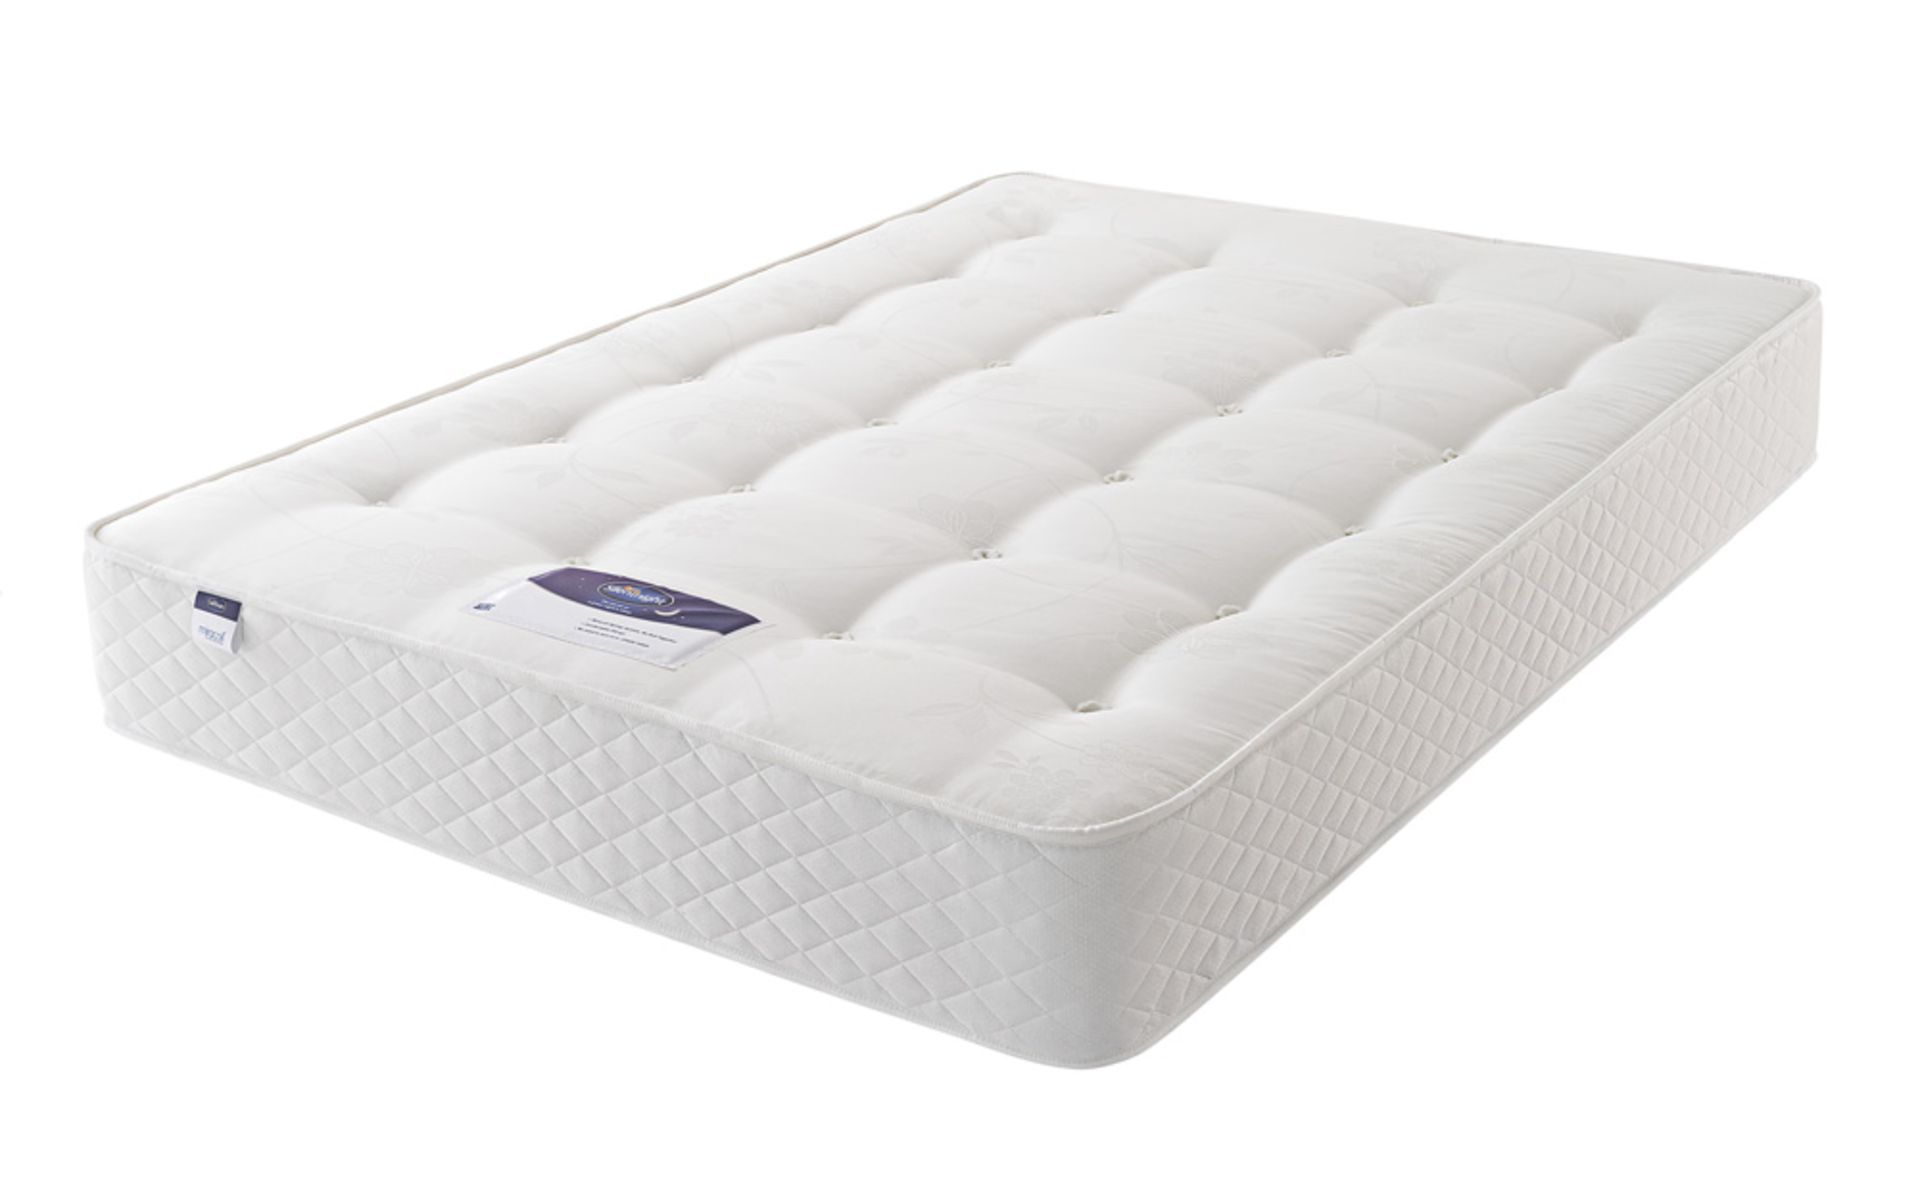 1 DOUBLES SIZE SILENTNIGHT ECO COMFORT FUSION MIRACOIL MATTRESS RRP Â£349 (PICTURES FOR ILLUSTRATION